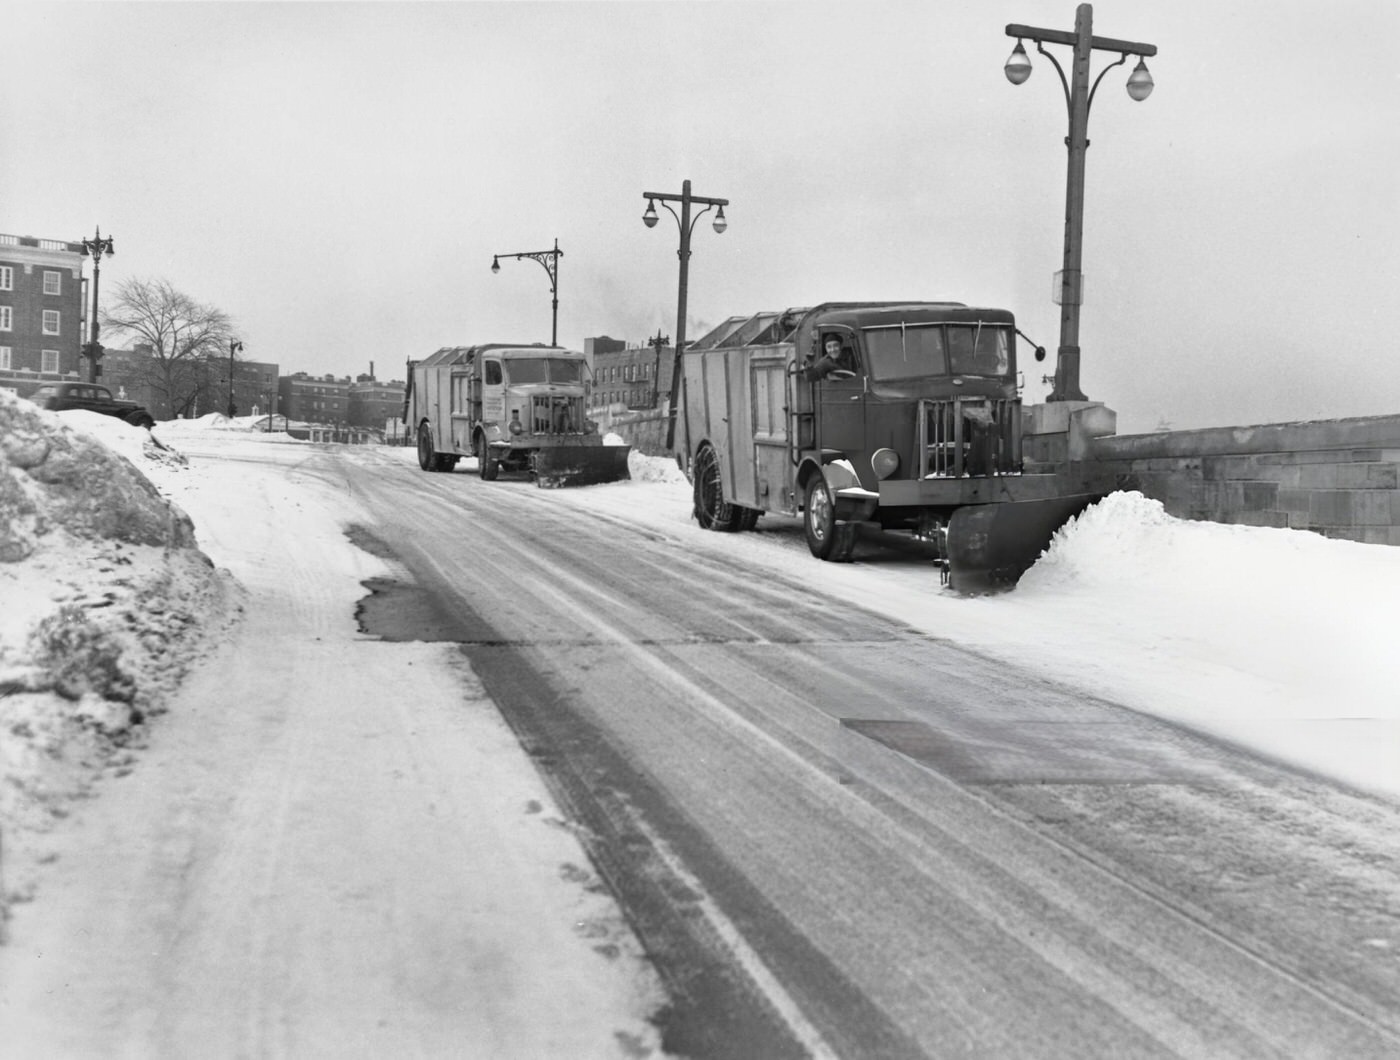 Department Of Sanitation Trucks With Plows Kept The Roads Clear Near Kew Gardens In Queens, New York City After A Blizzard, 1948.